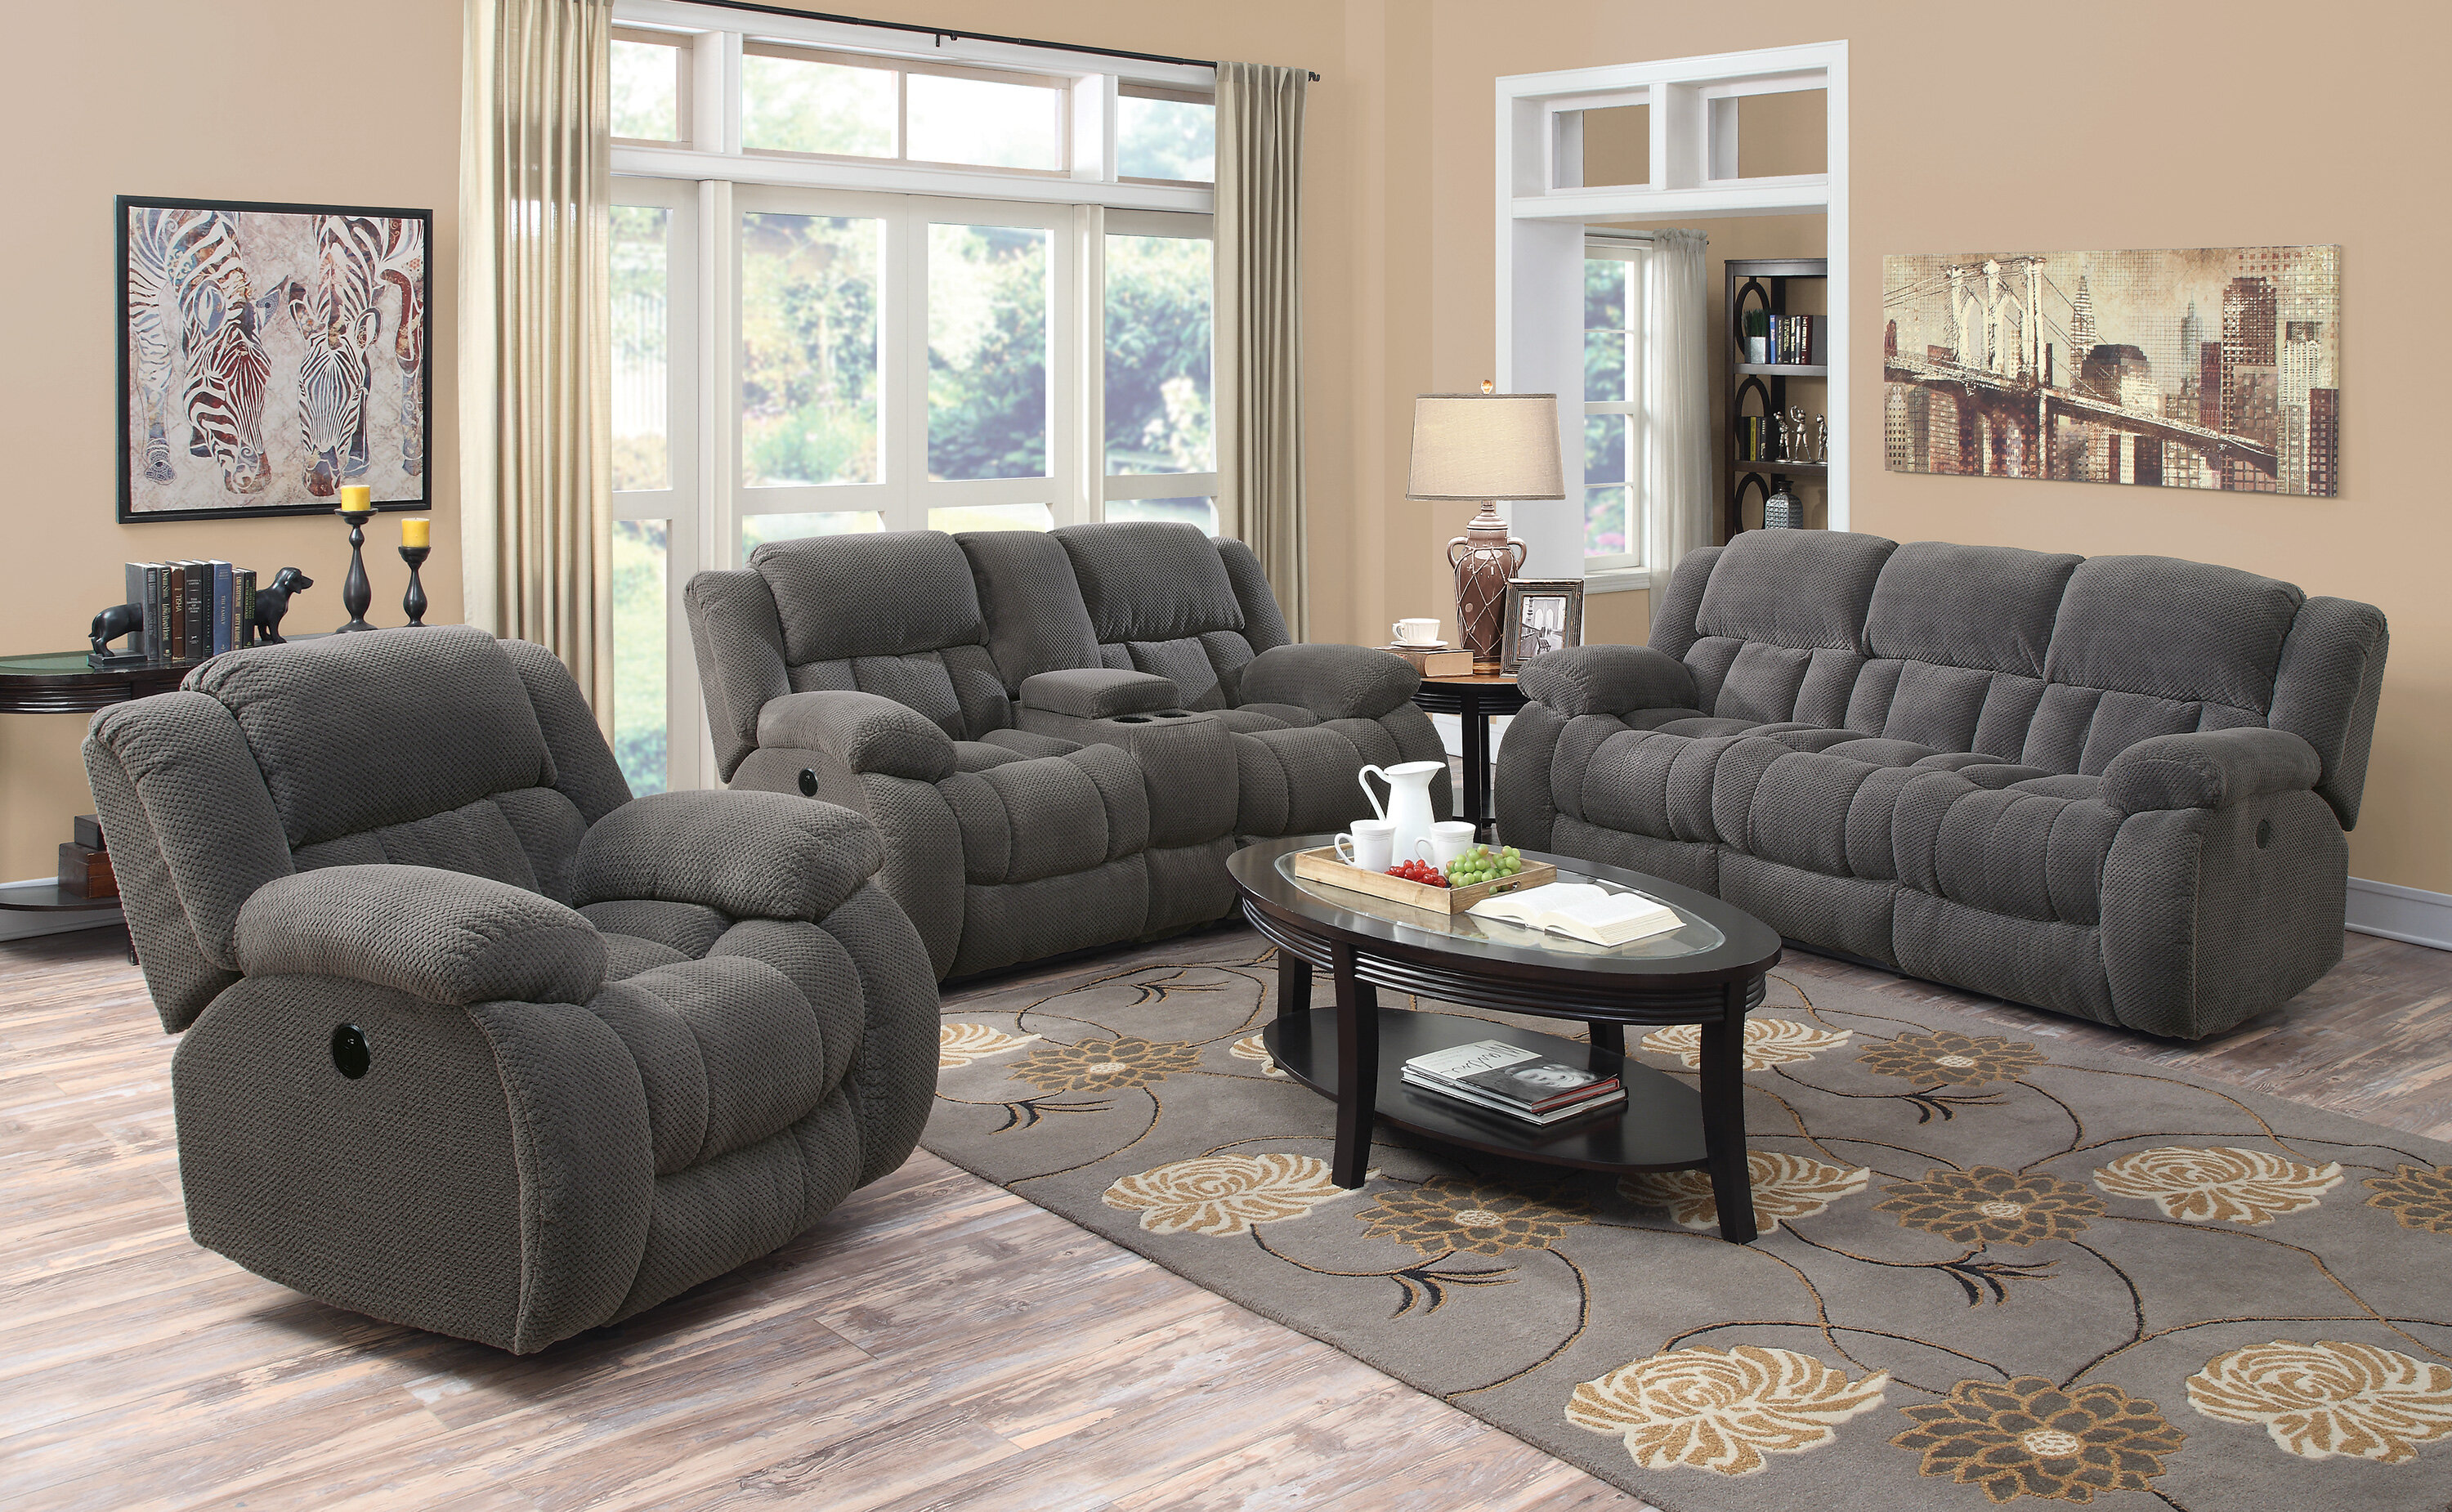 Holte 3 Piece Reclining Configurable Living Room Set